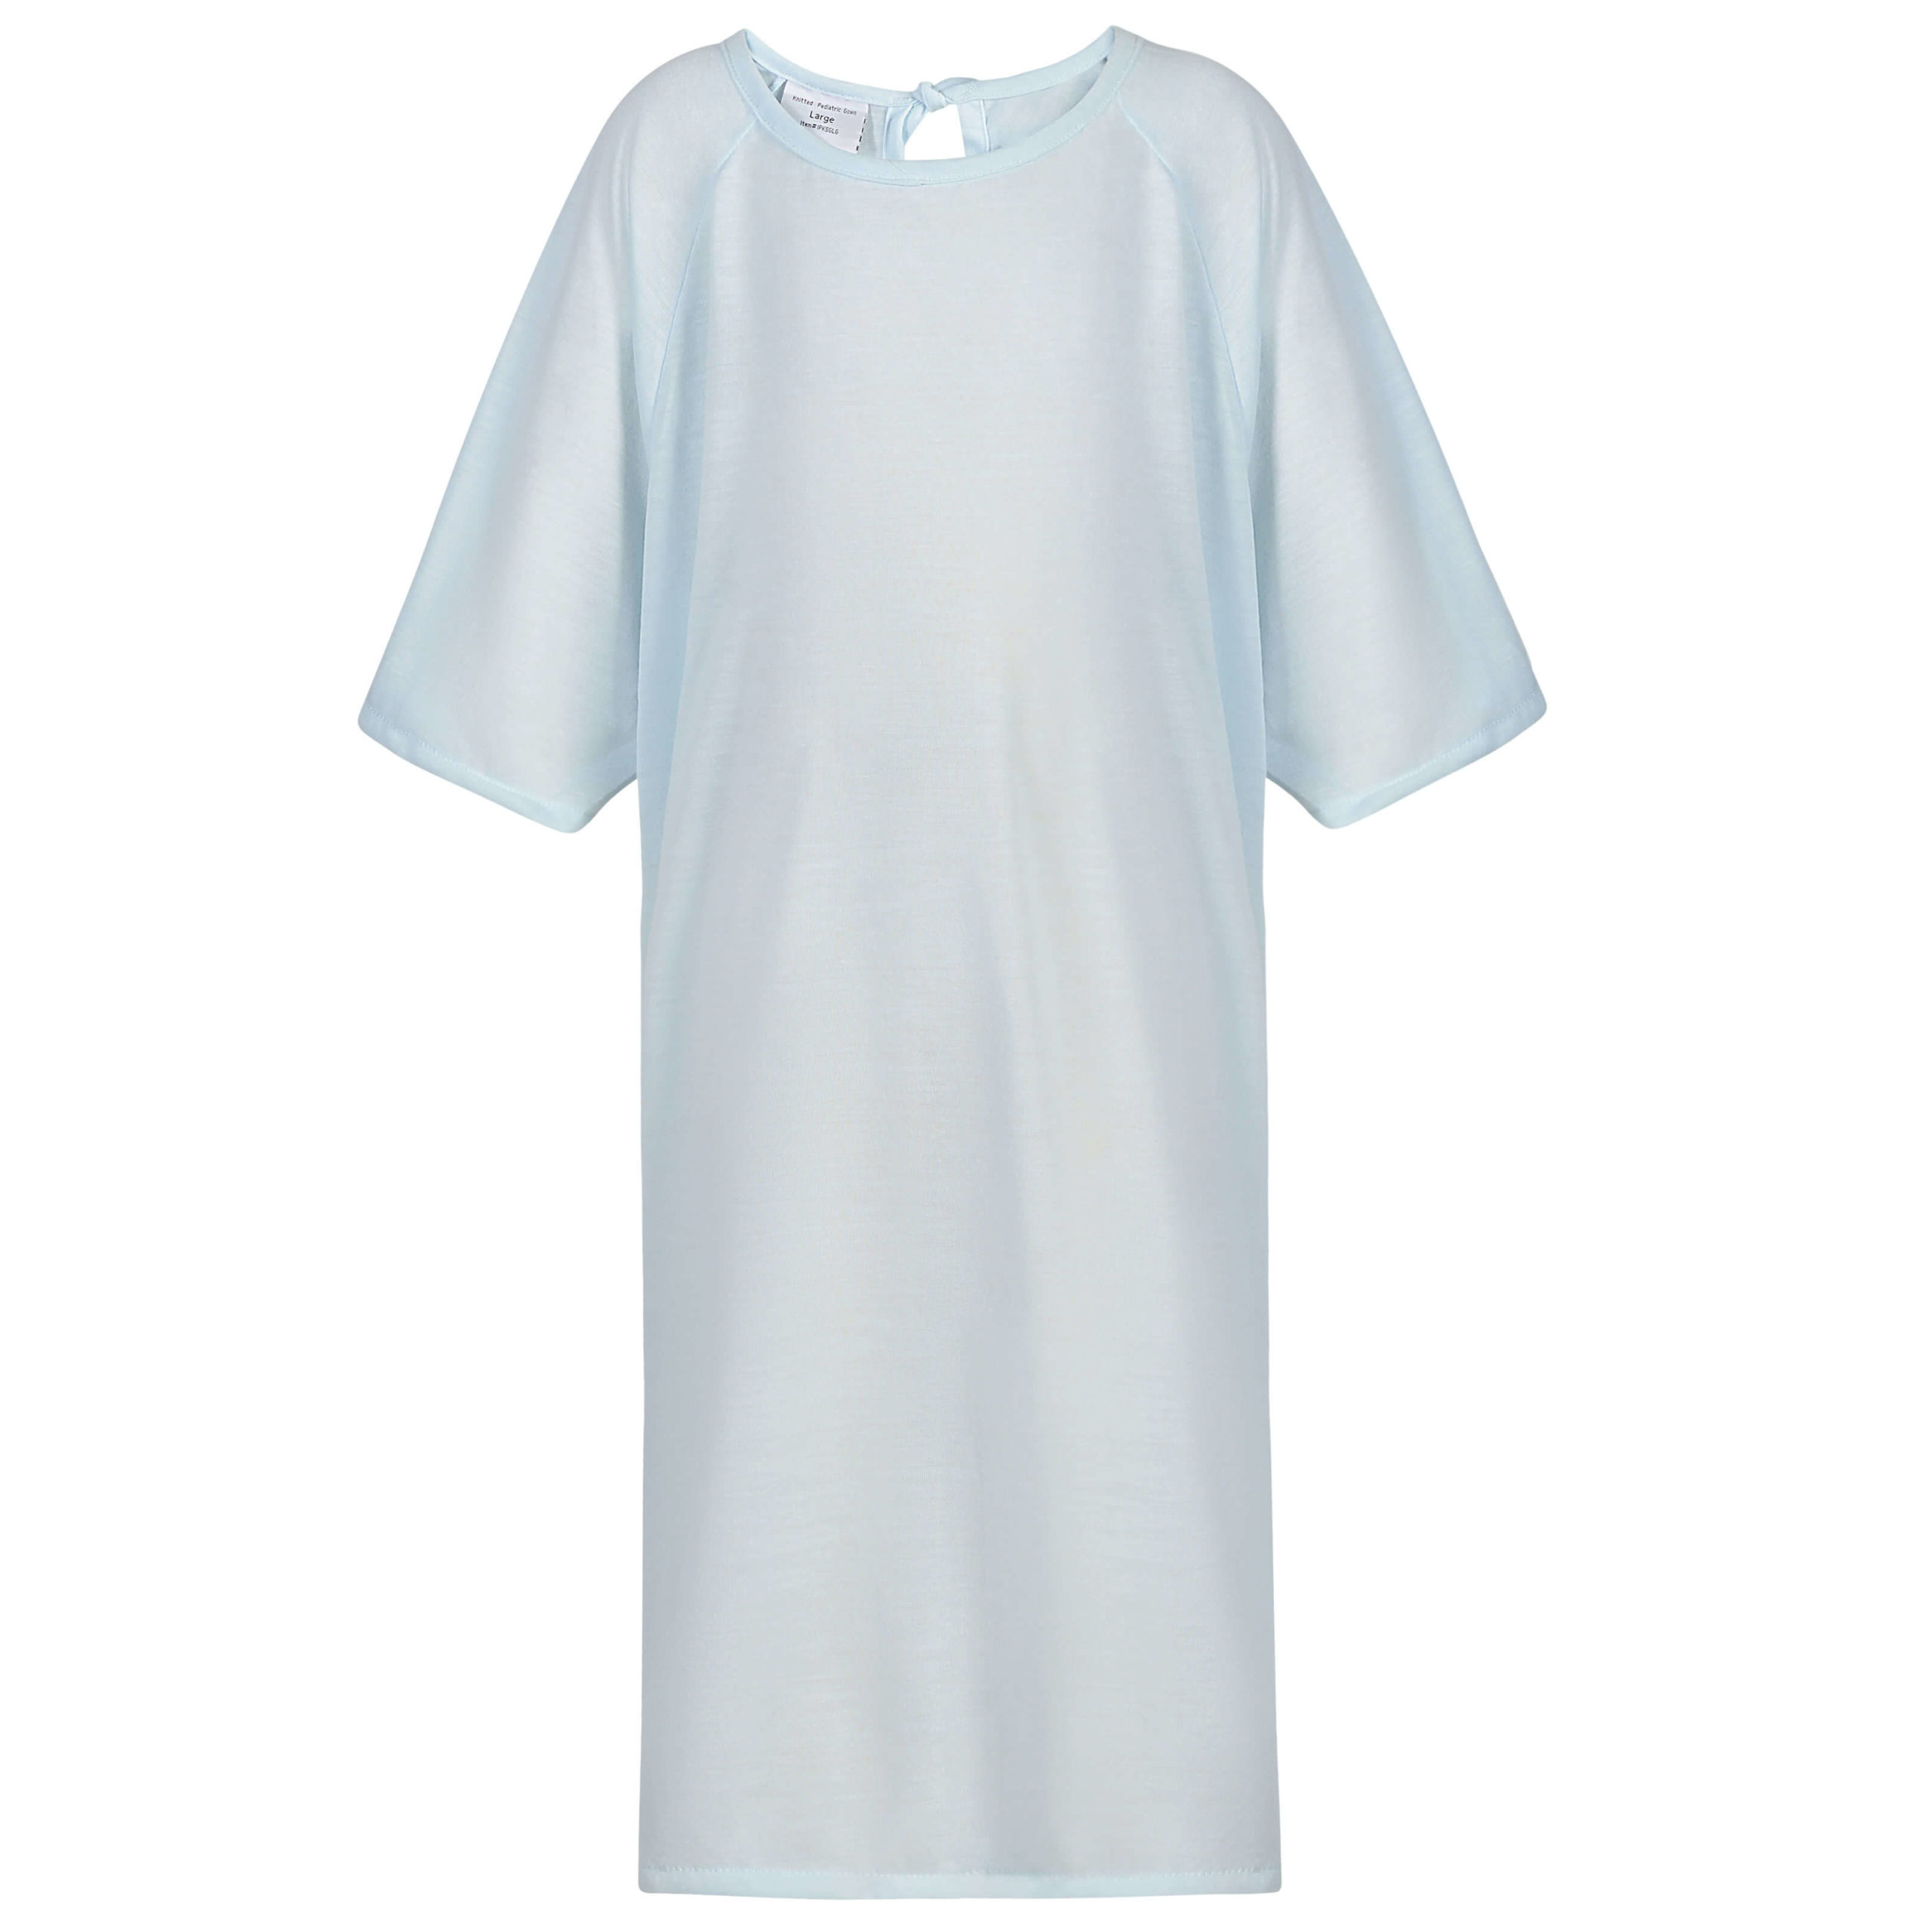 ReliaFit™ Knitted I.V. Pediatric Gowns